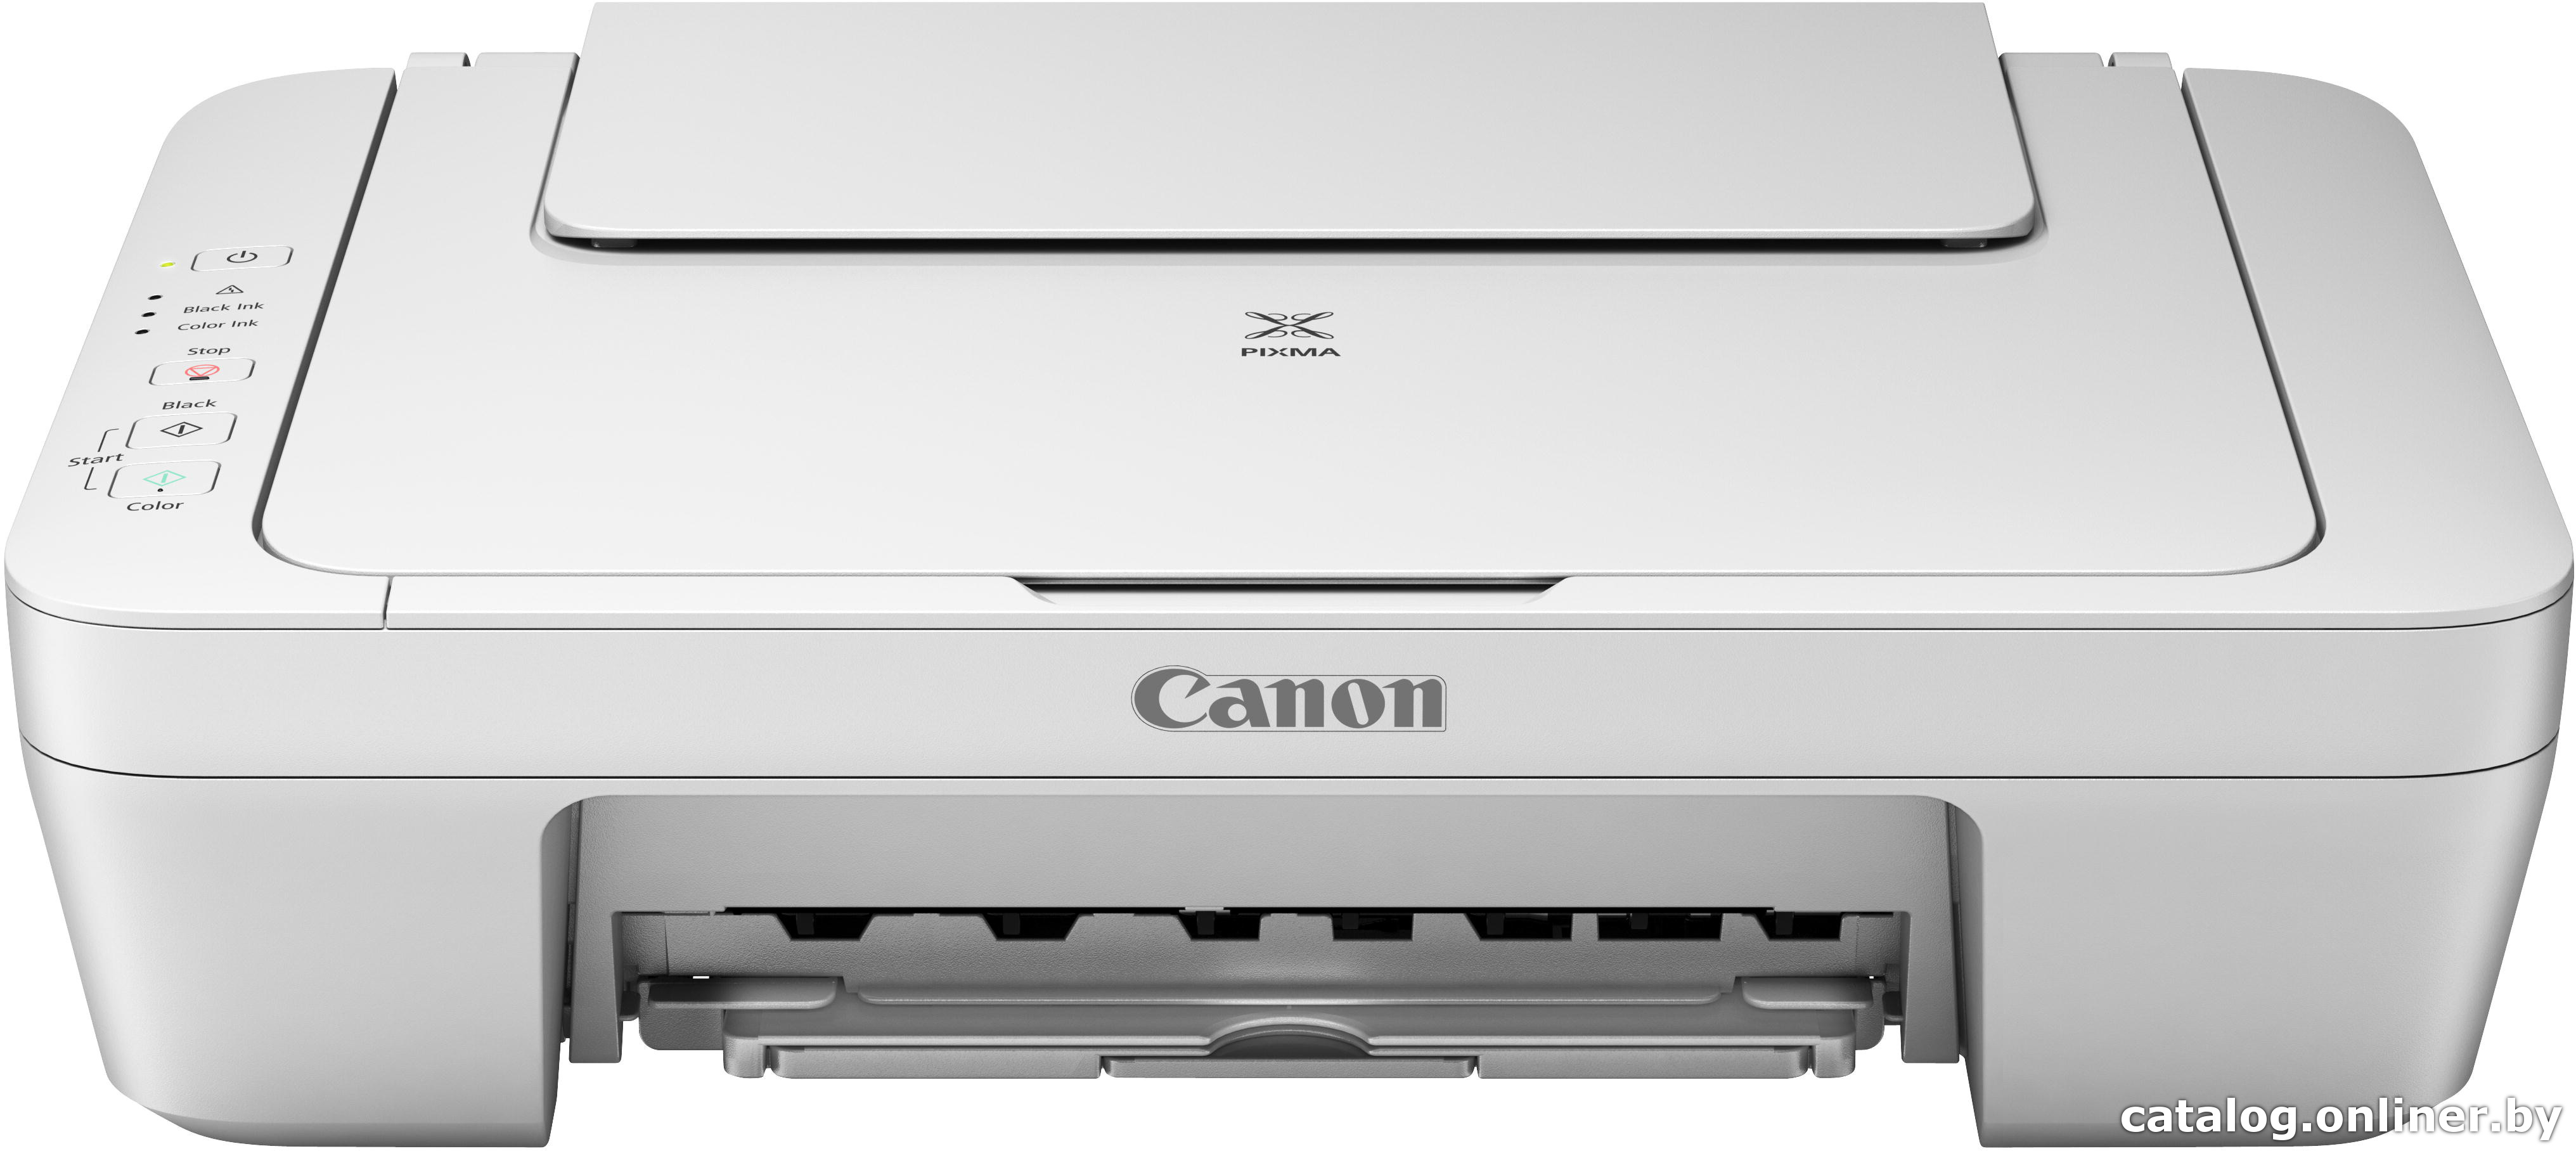 Canon MG2550S Driver Mac Sierra How-to Download and Install - Featured